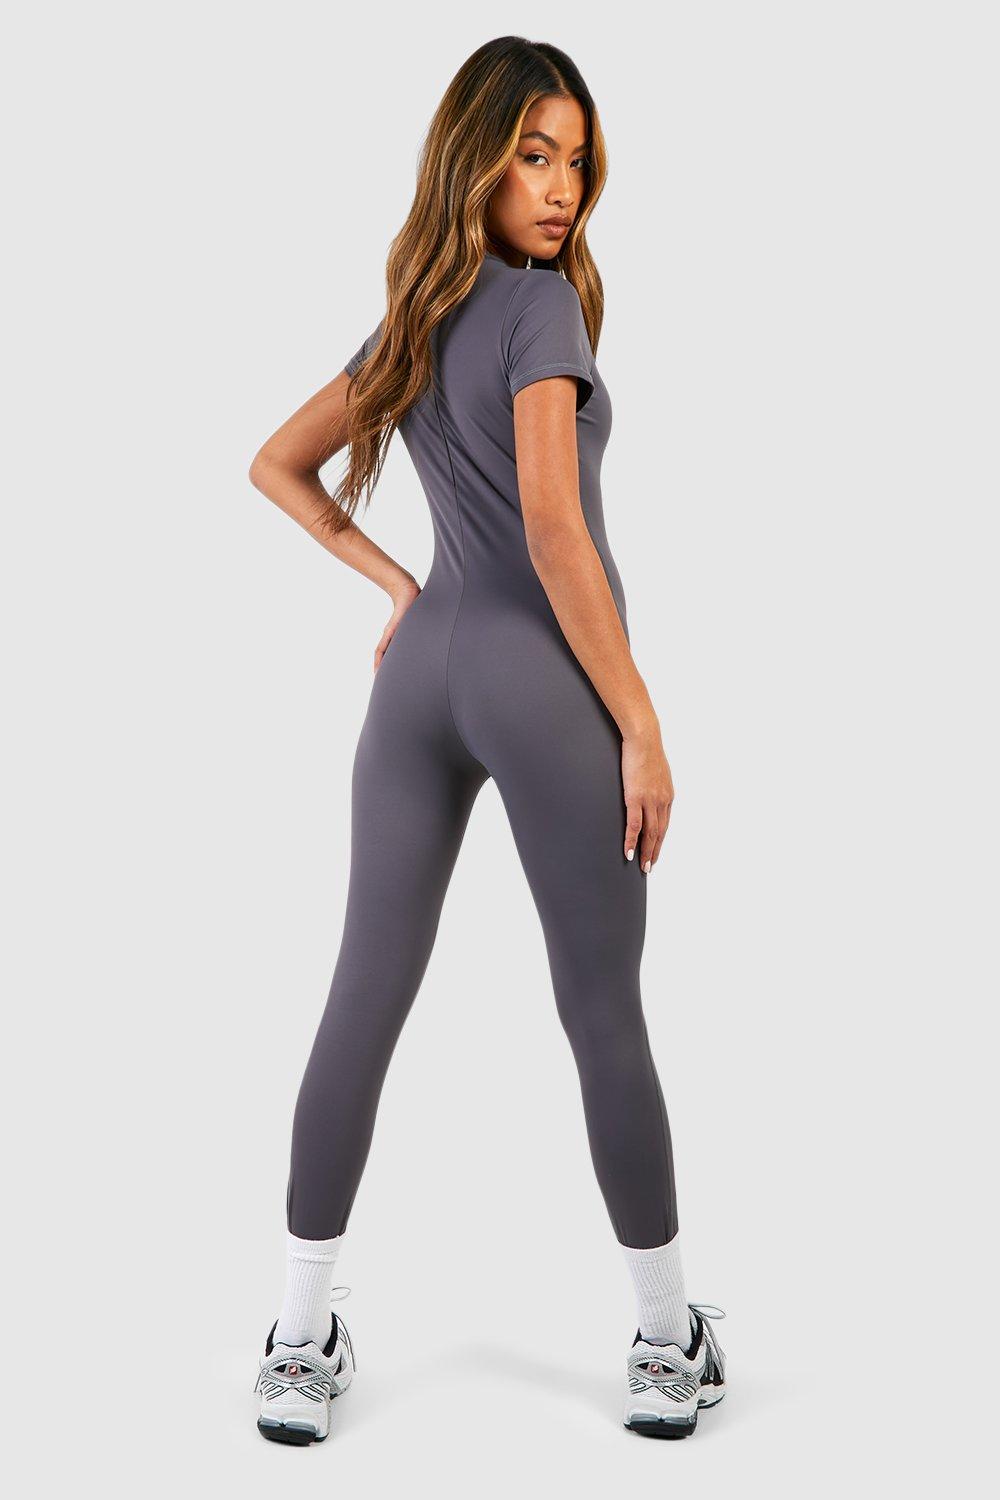 Women's Charcoal DSGN Studio Supersoft Peached Sculpt Padded